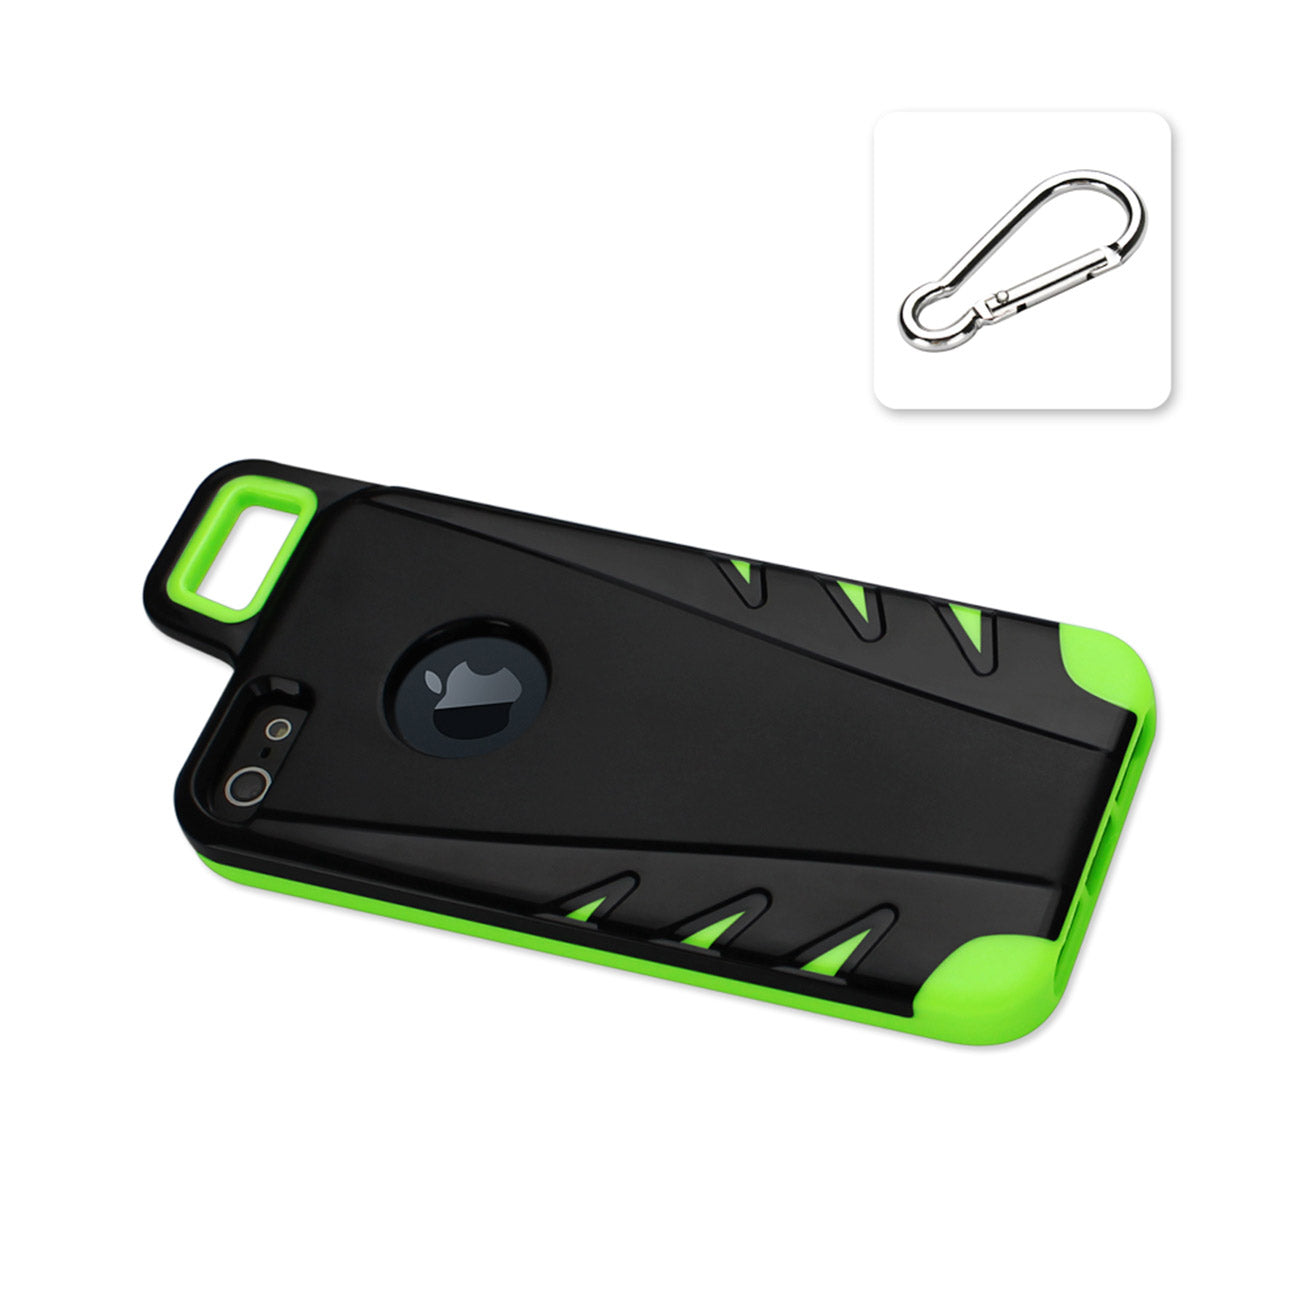 Case Hybrid iPhone 5/ 5S/ SE Drop Proof Workout With Hook Black Green Color